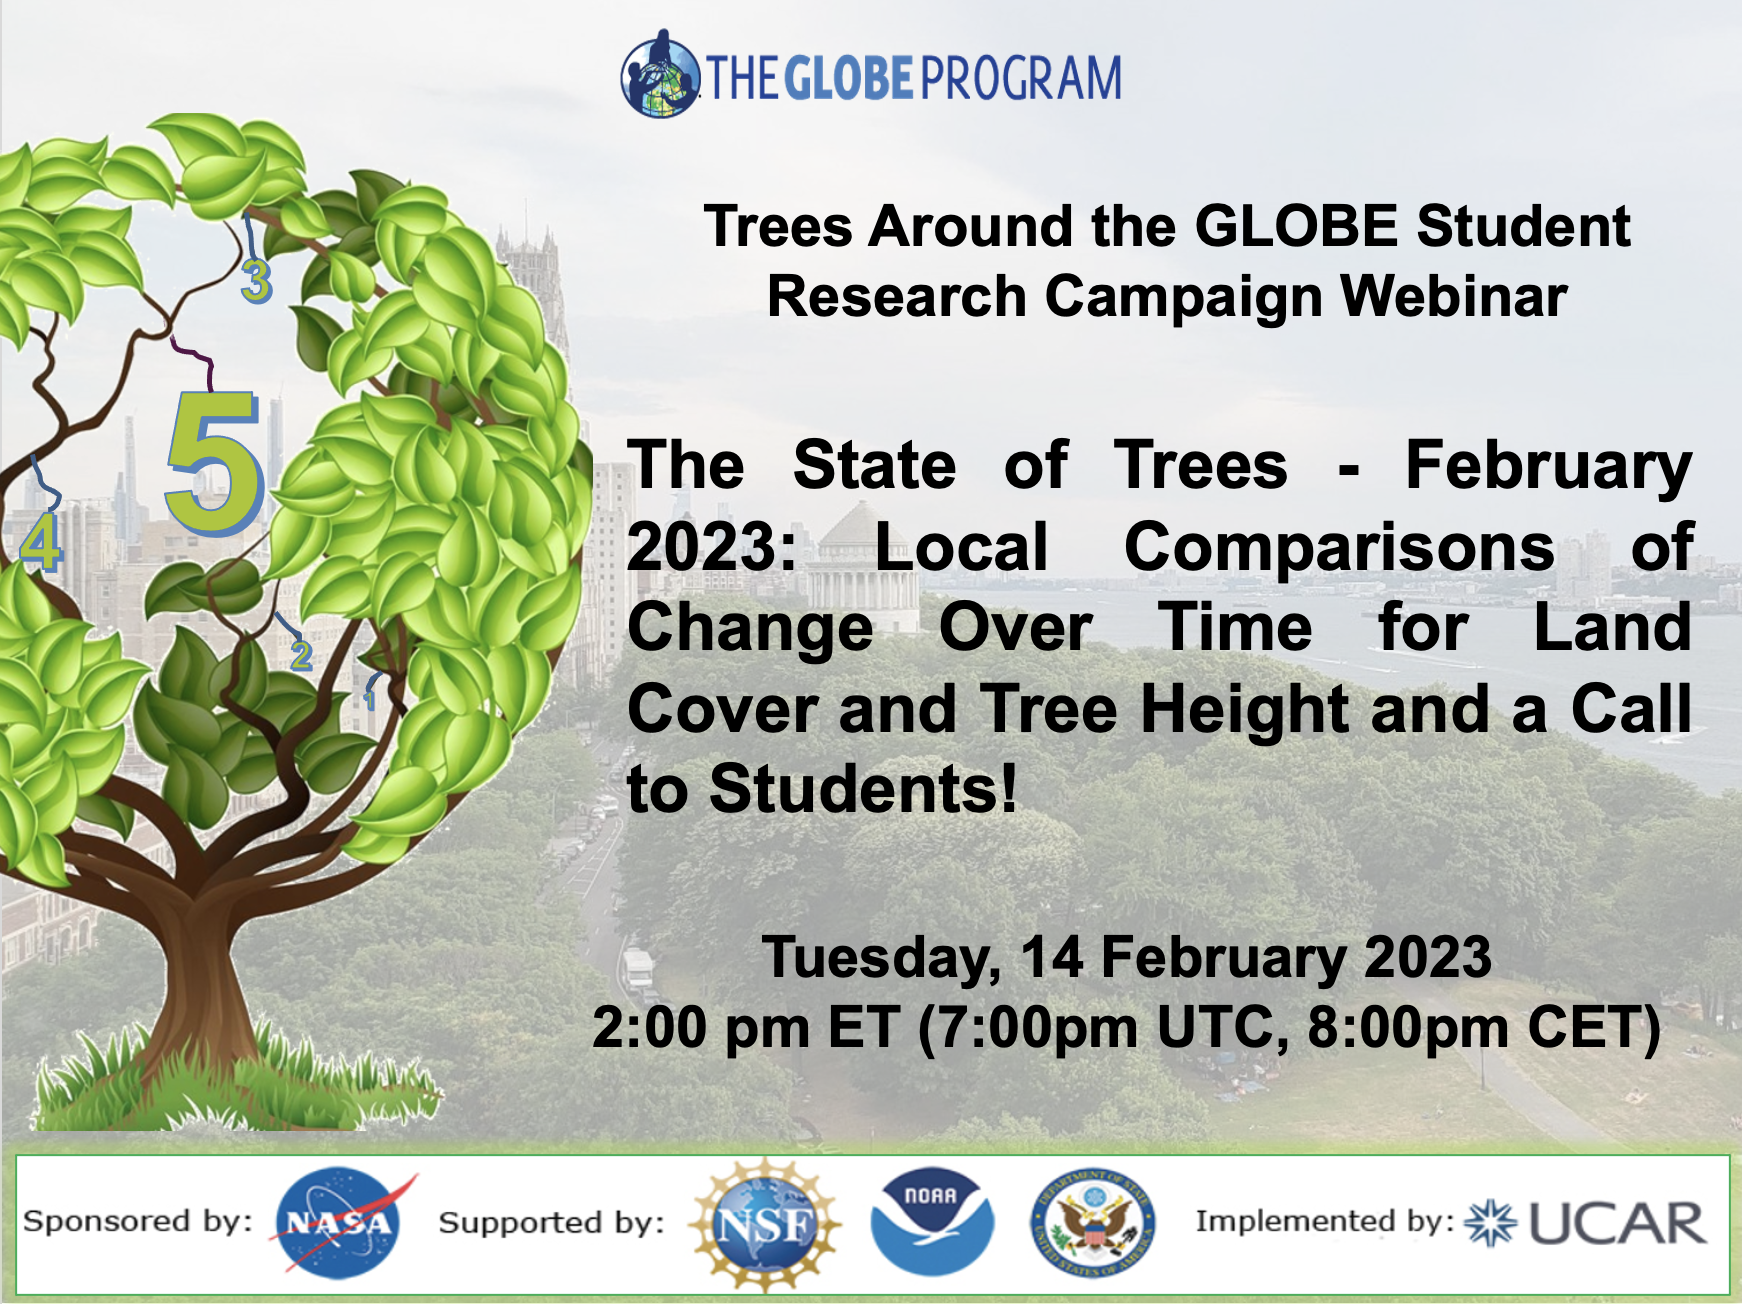 14 February Trees Around the GLOBE webinar shareable, showing the date and time of the event